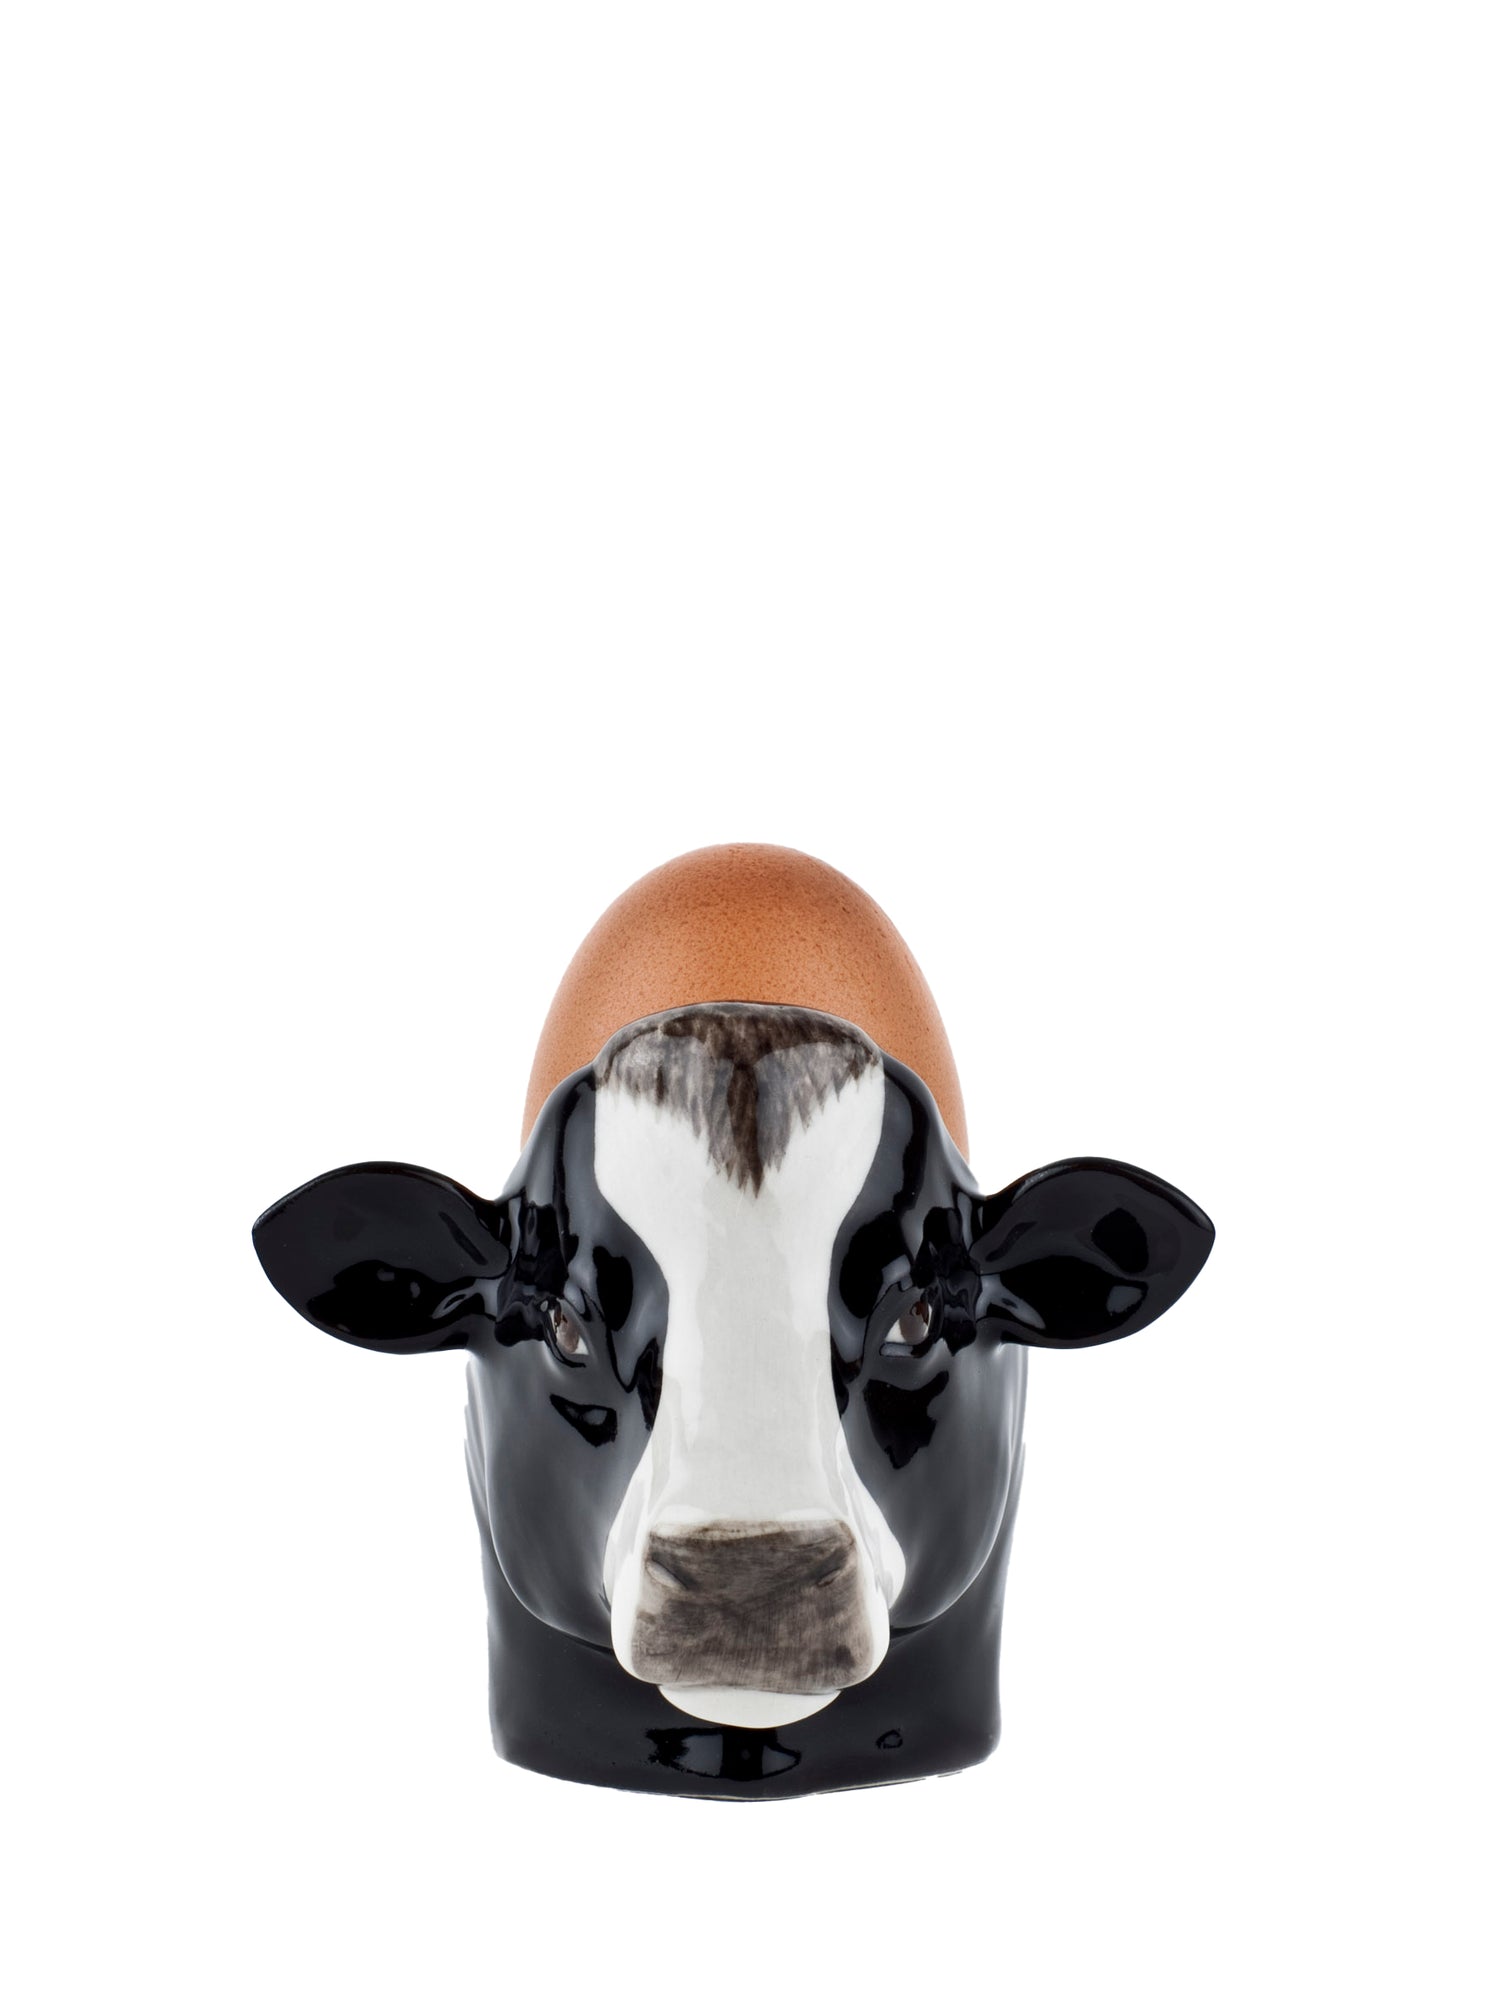 Cow egg cup